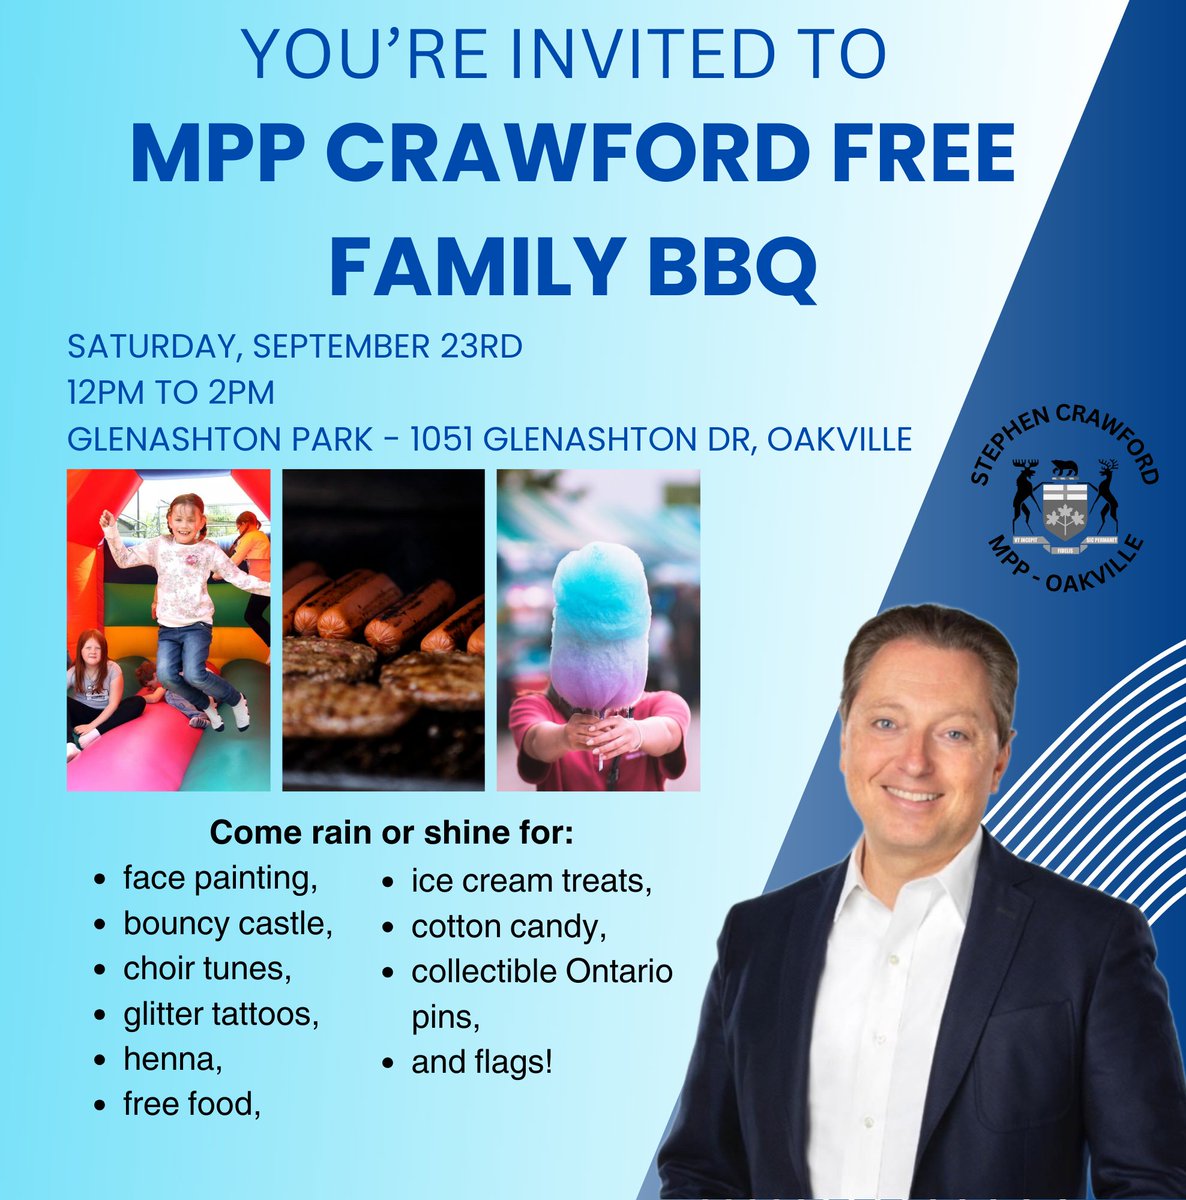 Good Morning!  Here are 3 Things Happening today:
1) MPP Crawford's Free Family BBQ from 12 to 2 at Glenashton Park
2) Milton Fall Fair: miltonfair.com
3) Oakville Community Play Day from 2-5pm : oakville.ca/community-even…